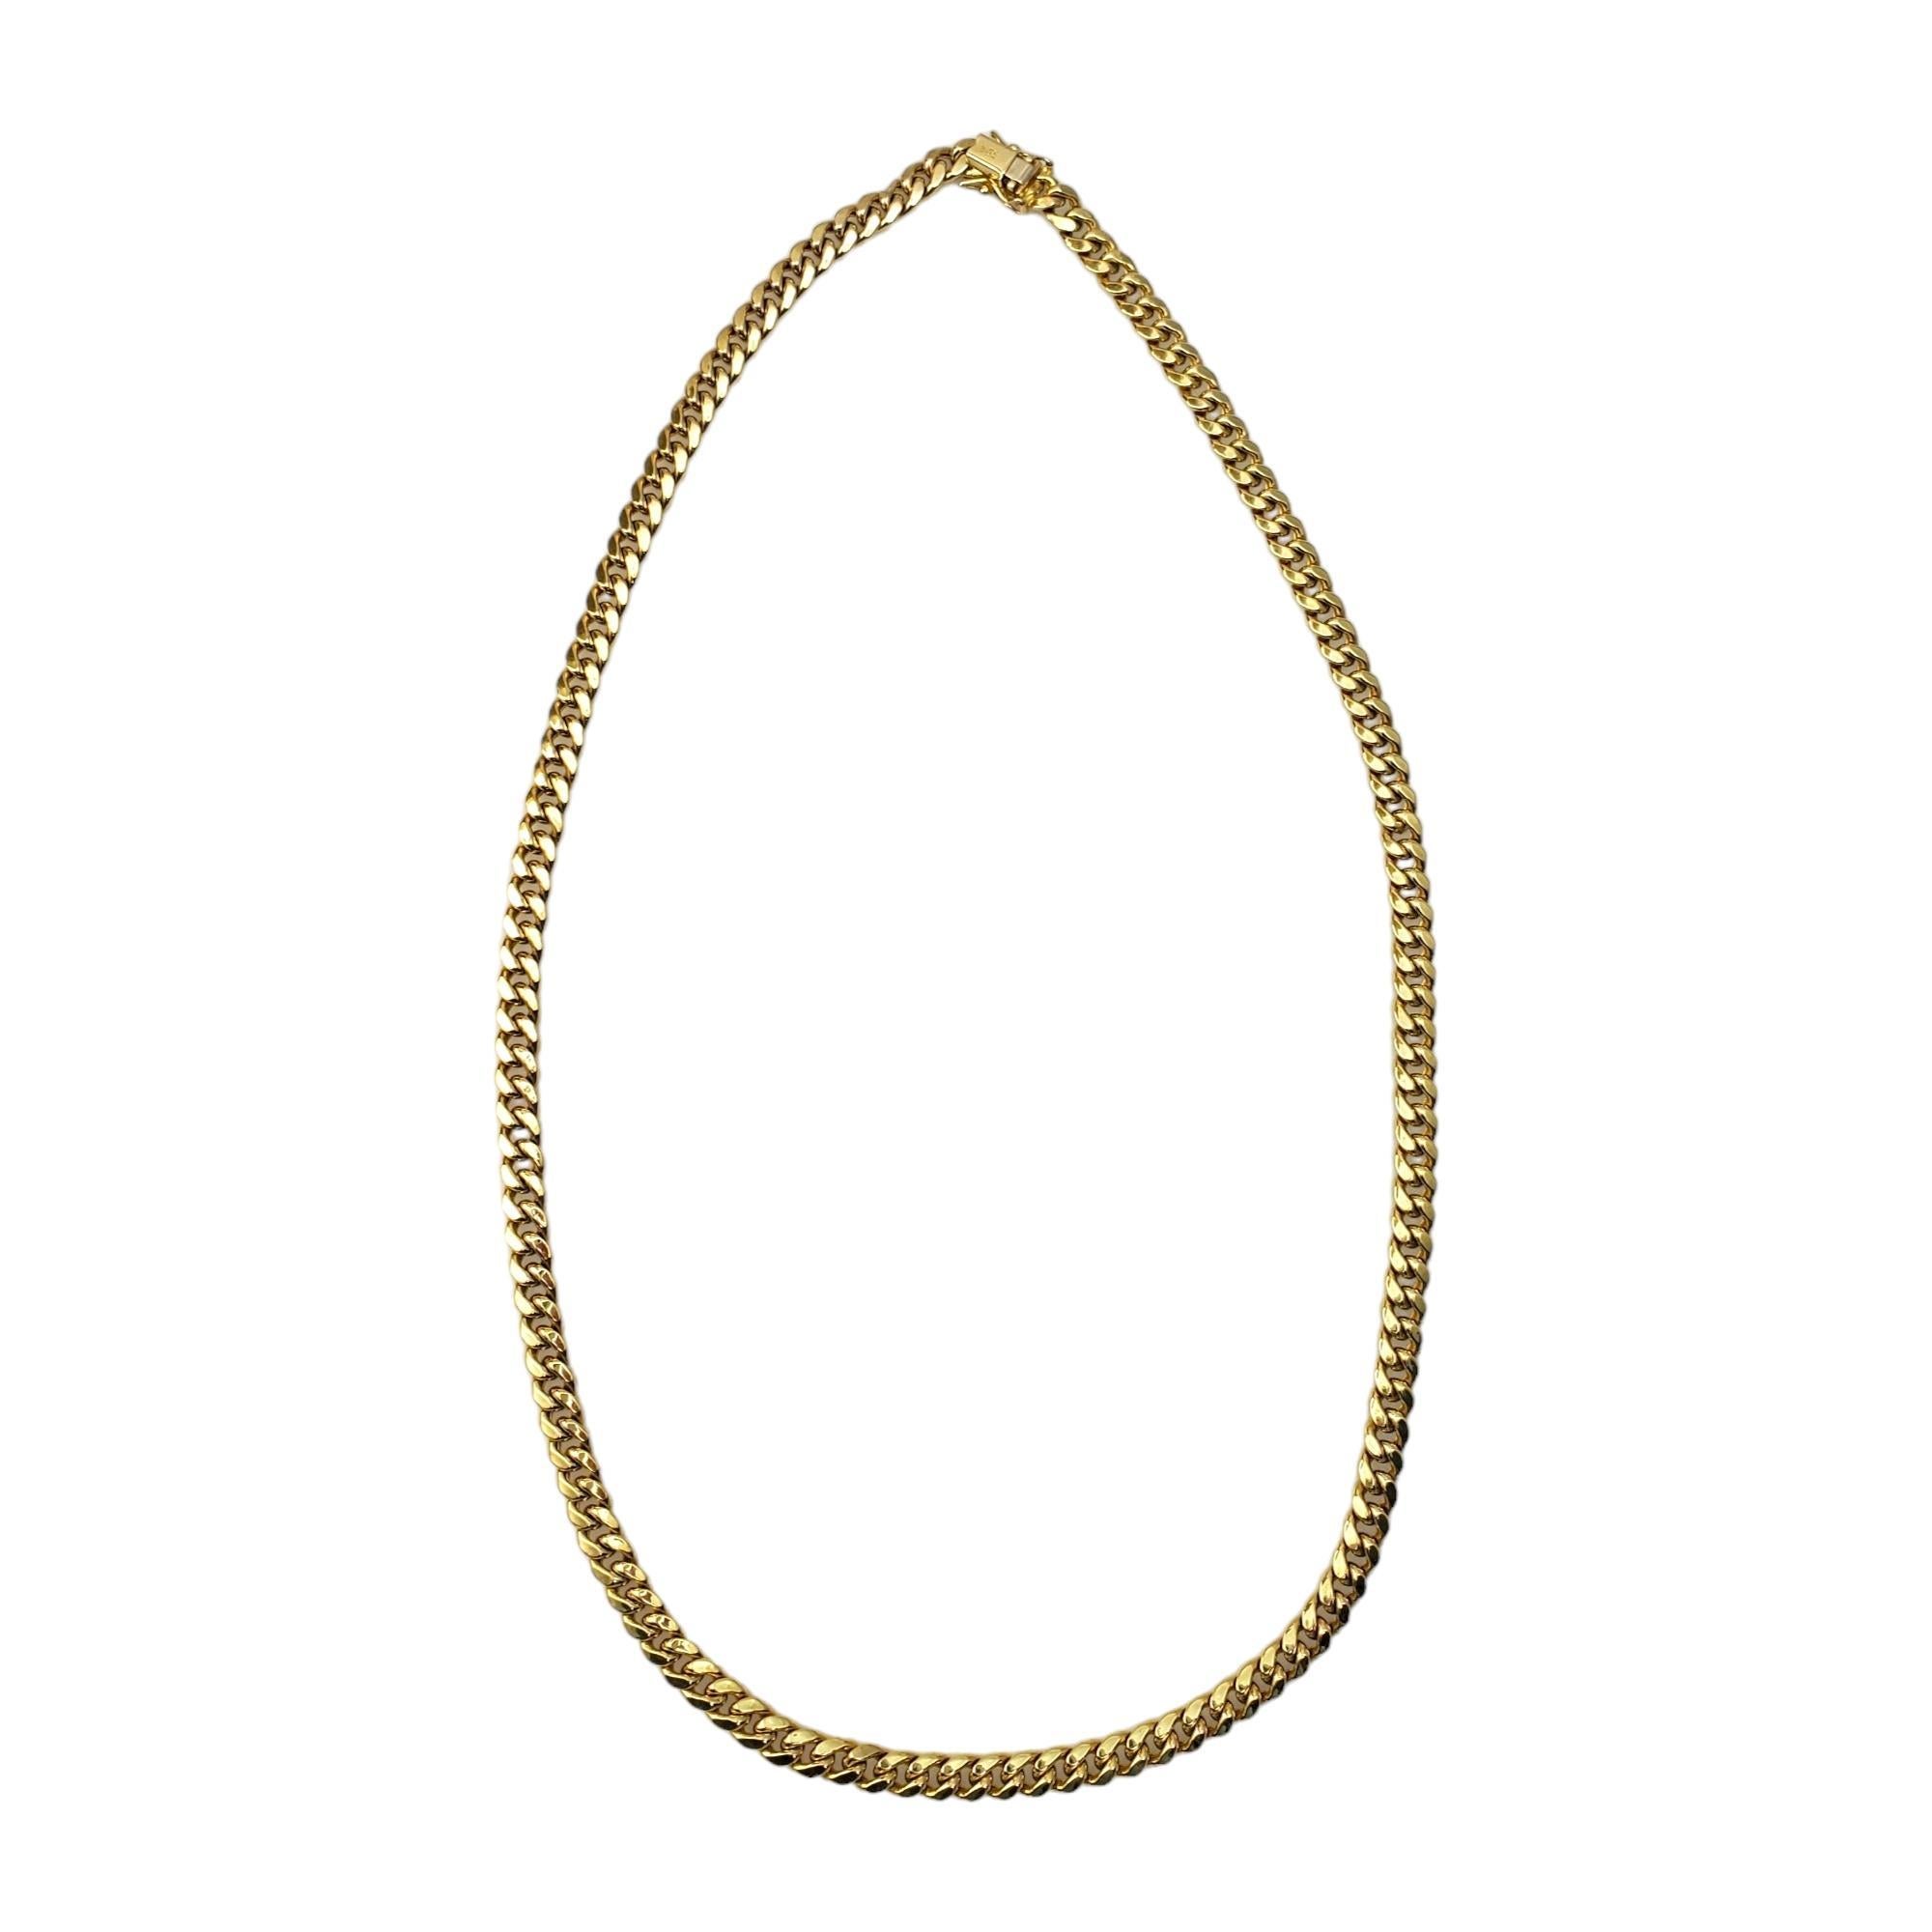 Vintage 14K Yellow Gold Curb Chain - 

This bold curb chain is crafted in meticulously detailed 14K yellow gold. 
 
Chain Length: 22 Inches

Hollow links 6mm wide

Weight: 14.9 dwt. / 23.3 gr.

Marked: 14K RCI JO

Very good condition, professionally